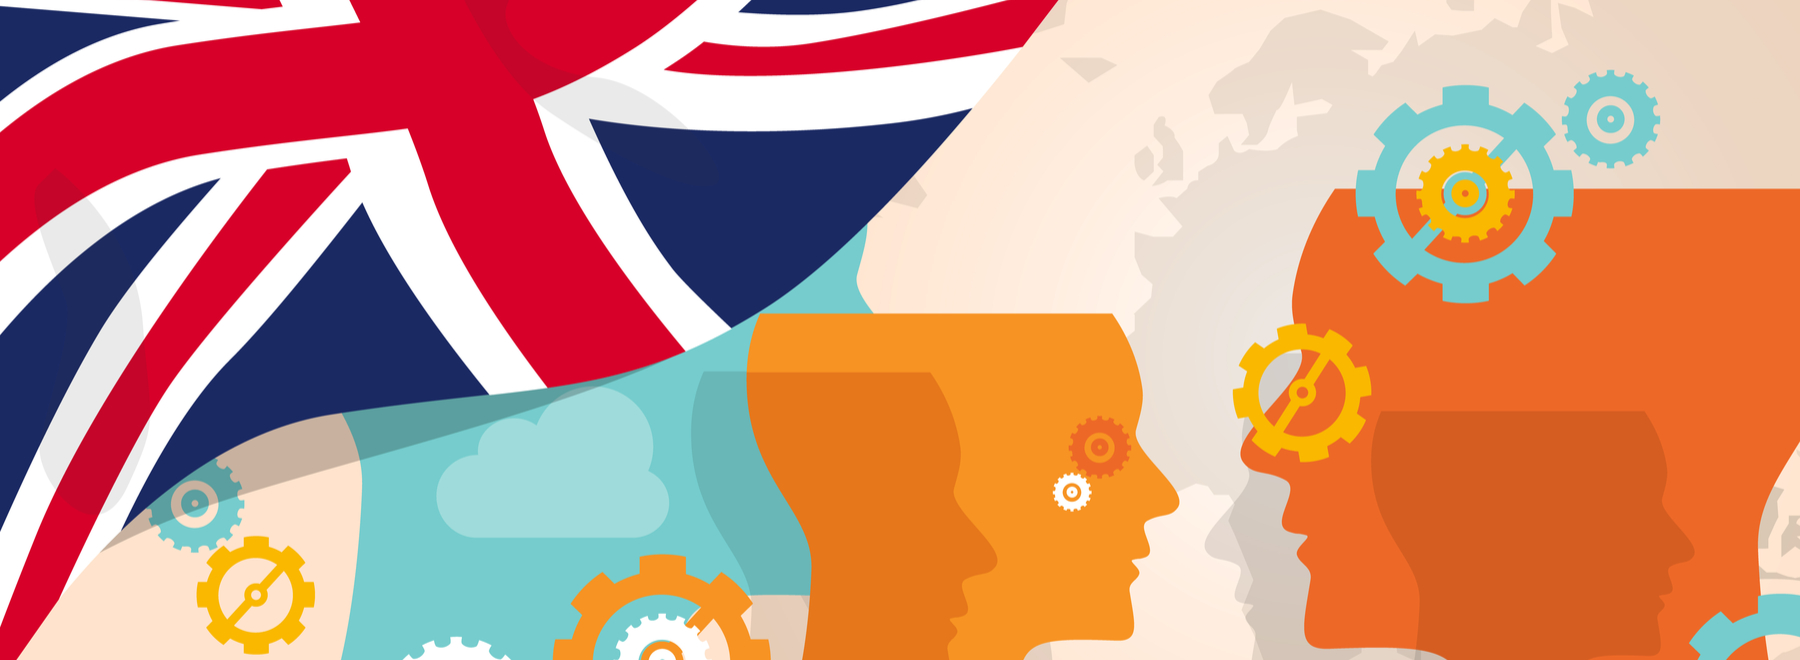 Tax E-News 2017, Heads with cogs and Union Jack in top left corner.